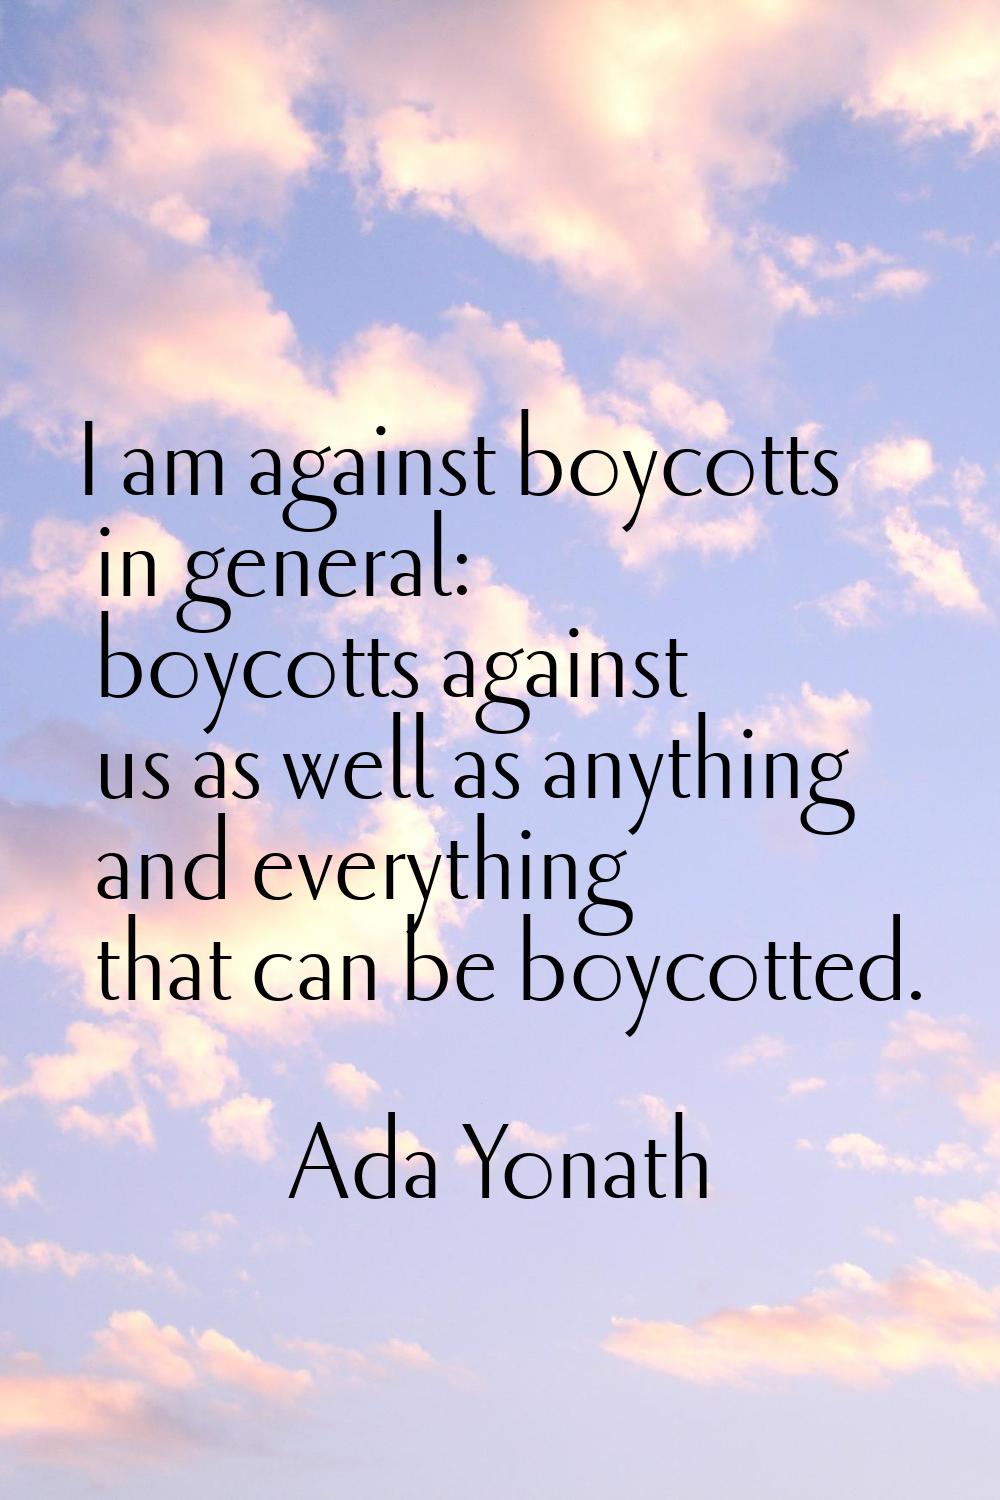 I am against boycotts in general: boycotts against us as well as anything and everything that can b